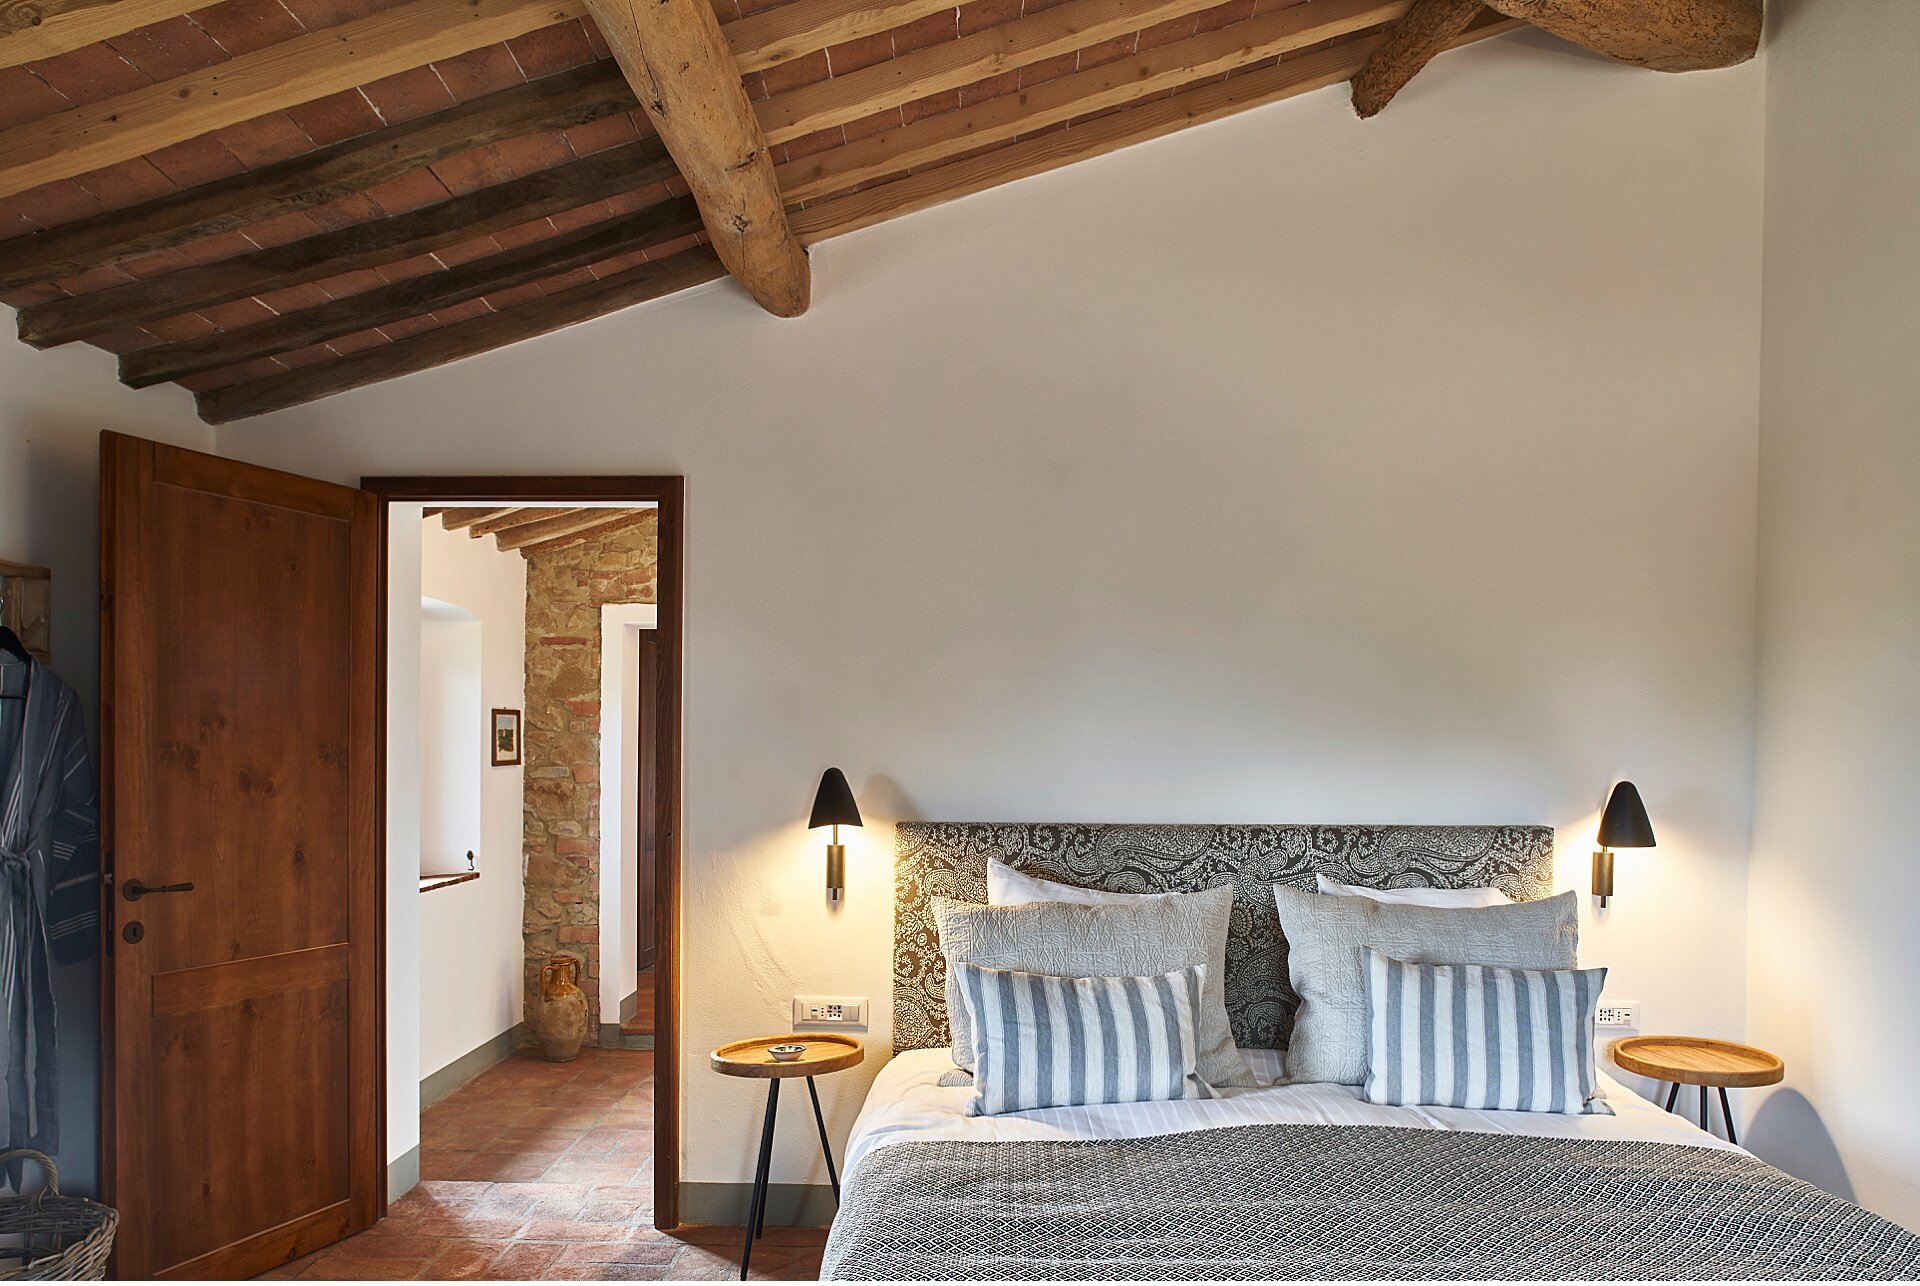  Beautiful newly restored villa in Tuscany between florence, pisa and siena, in Montaione. The property was obtained from an old wine production farm. It overlooks the Tuscan hills of Chianti with an infinity pool. Numerous rooms and spacious living 